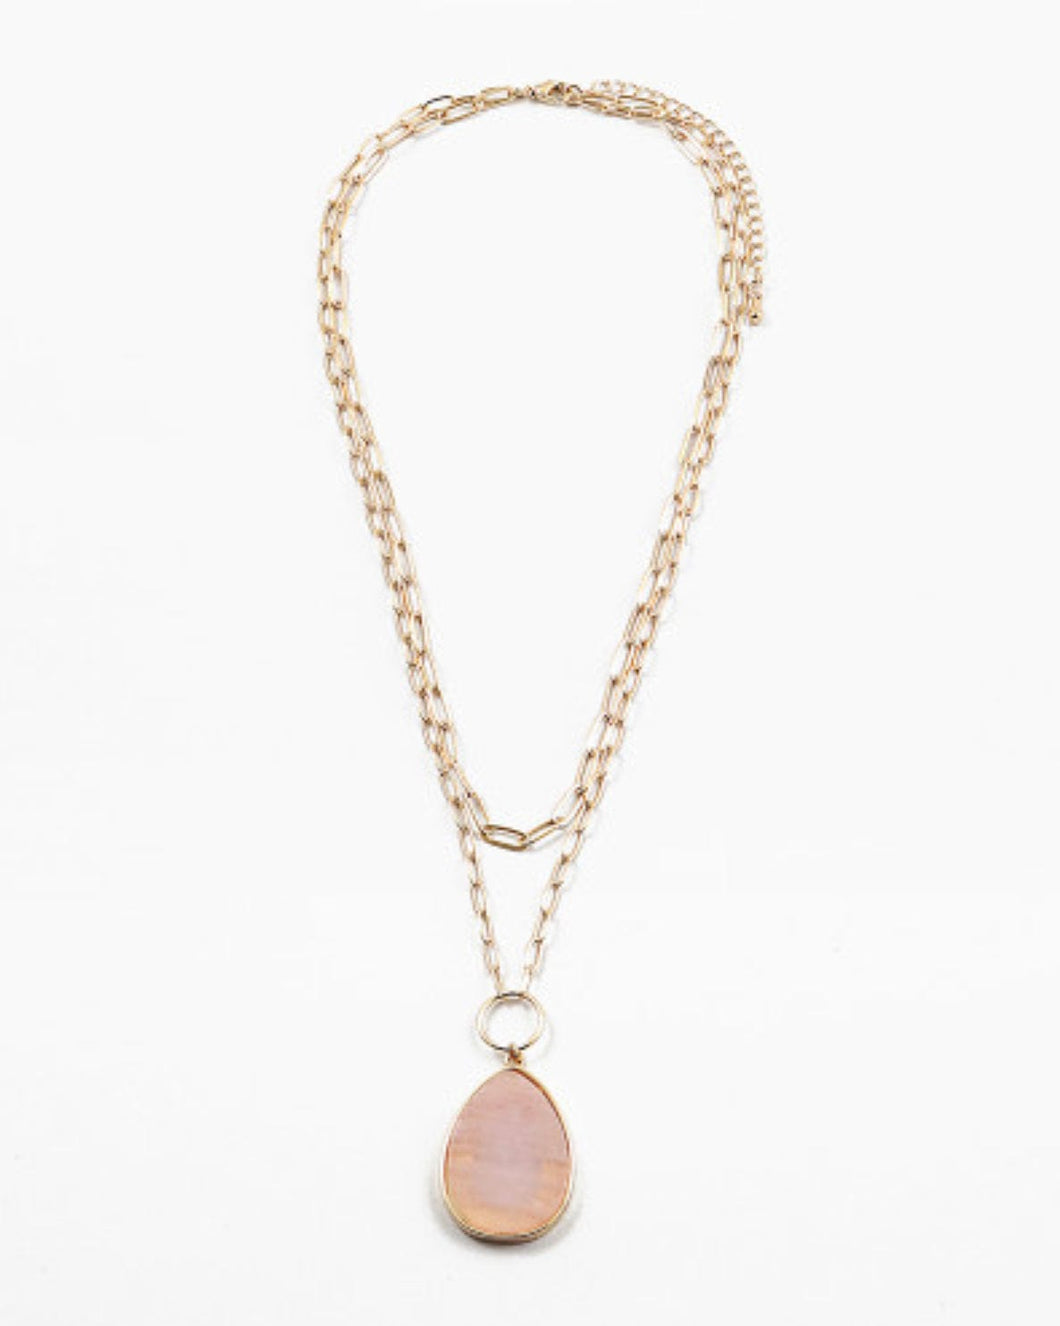 Double Chain with Teardrop Necklace